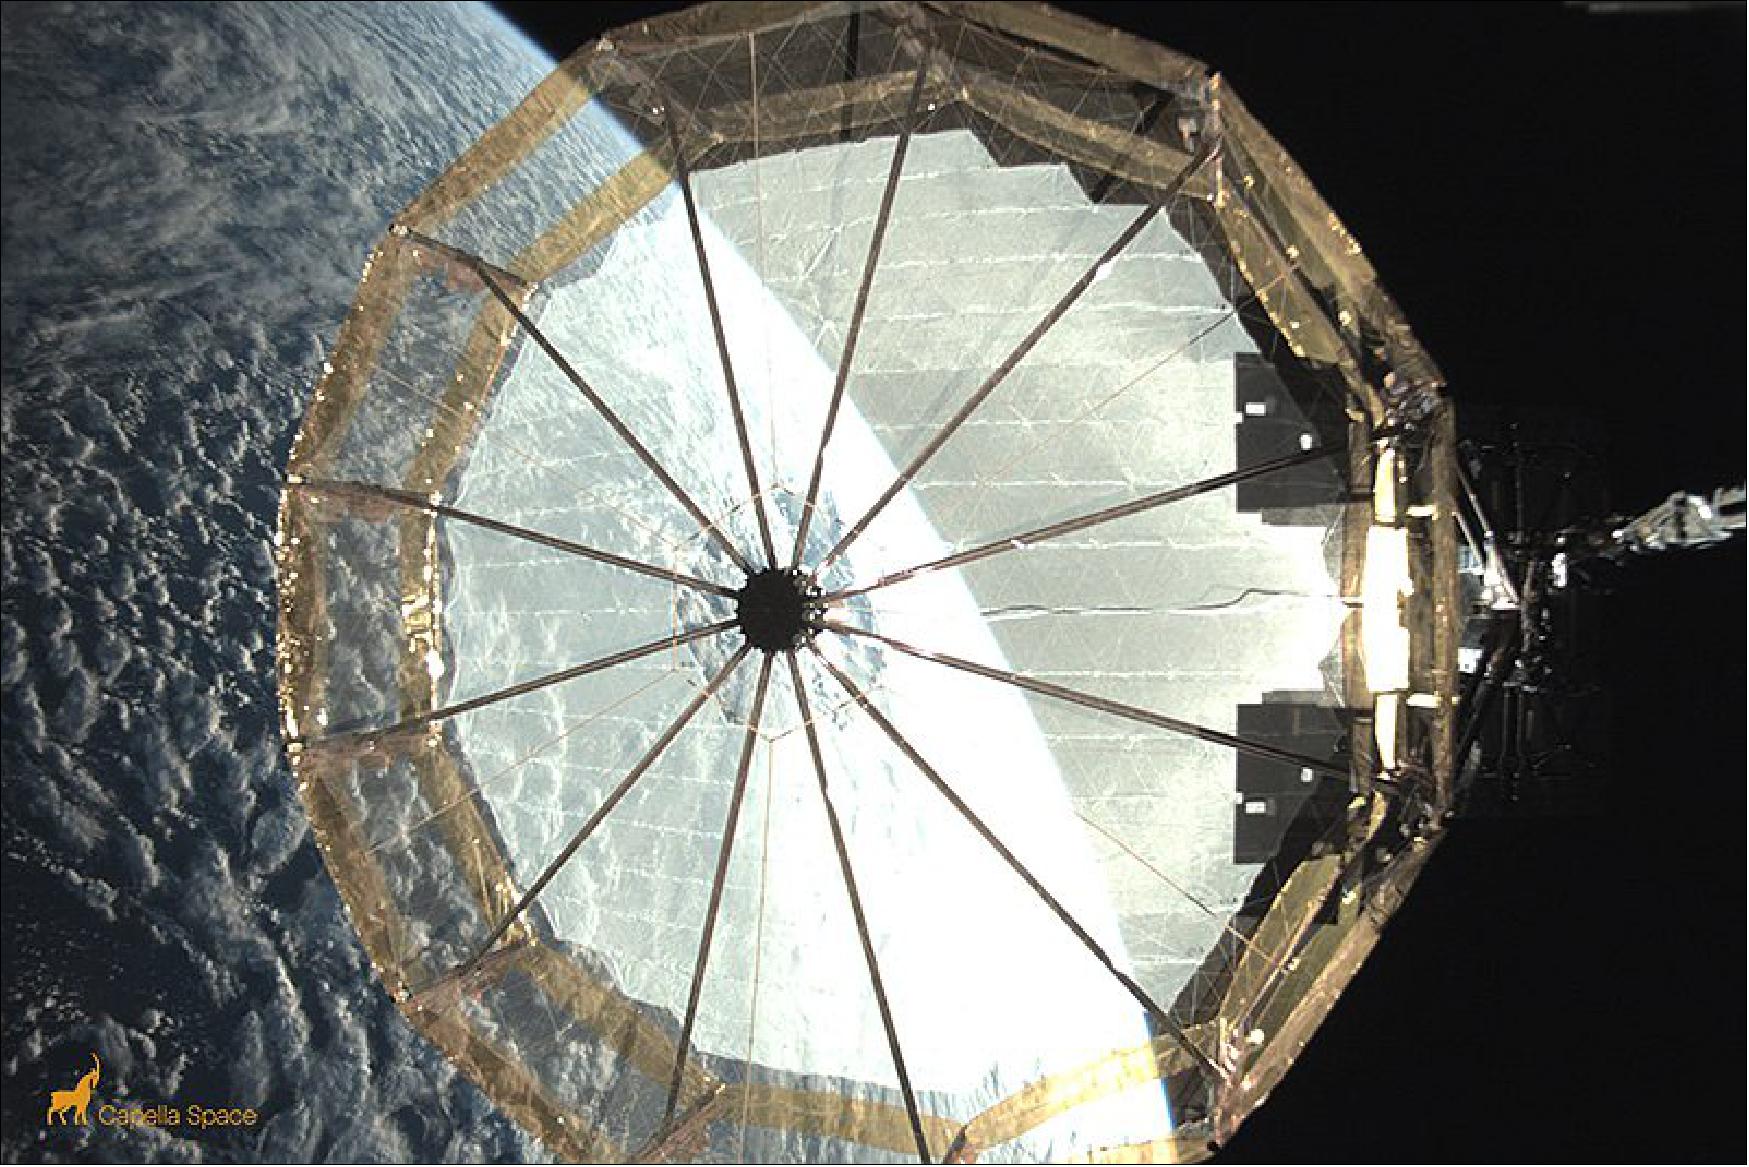 Figure 16: Reflector Antenna Deployment. Engineers deployed the antenna over a series of ground contacts, tensioning the instrument to millimeter-level precision. In this image, you can see the final deployment of our mesh-based reflector antenna. It’s designed to deliver high-contrast, high-resolution and low-noise imagery (image credit: Capella Space)